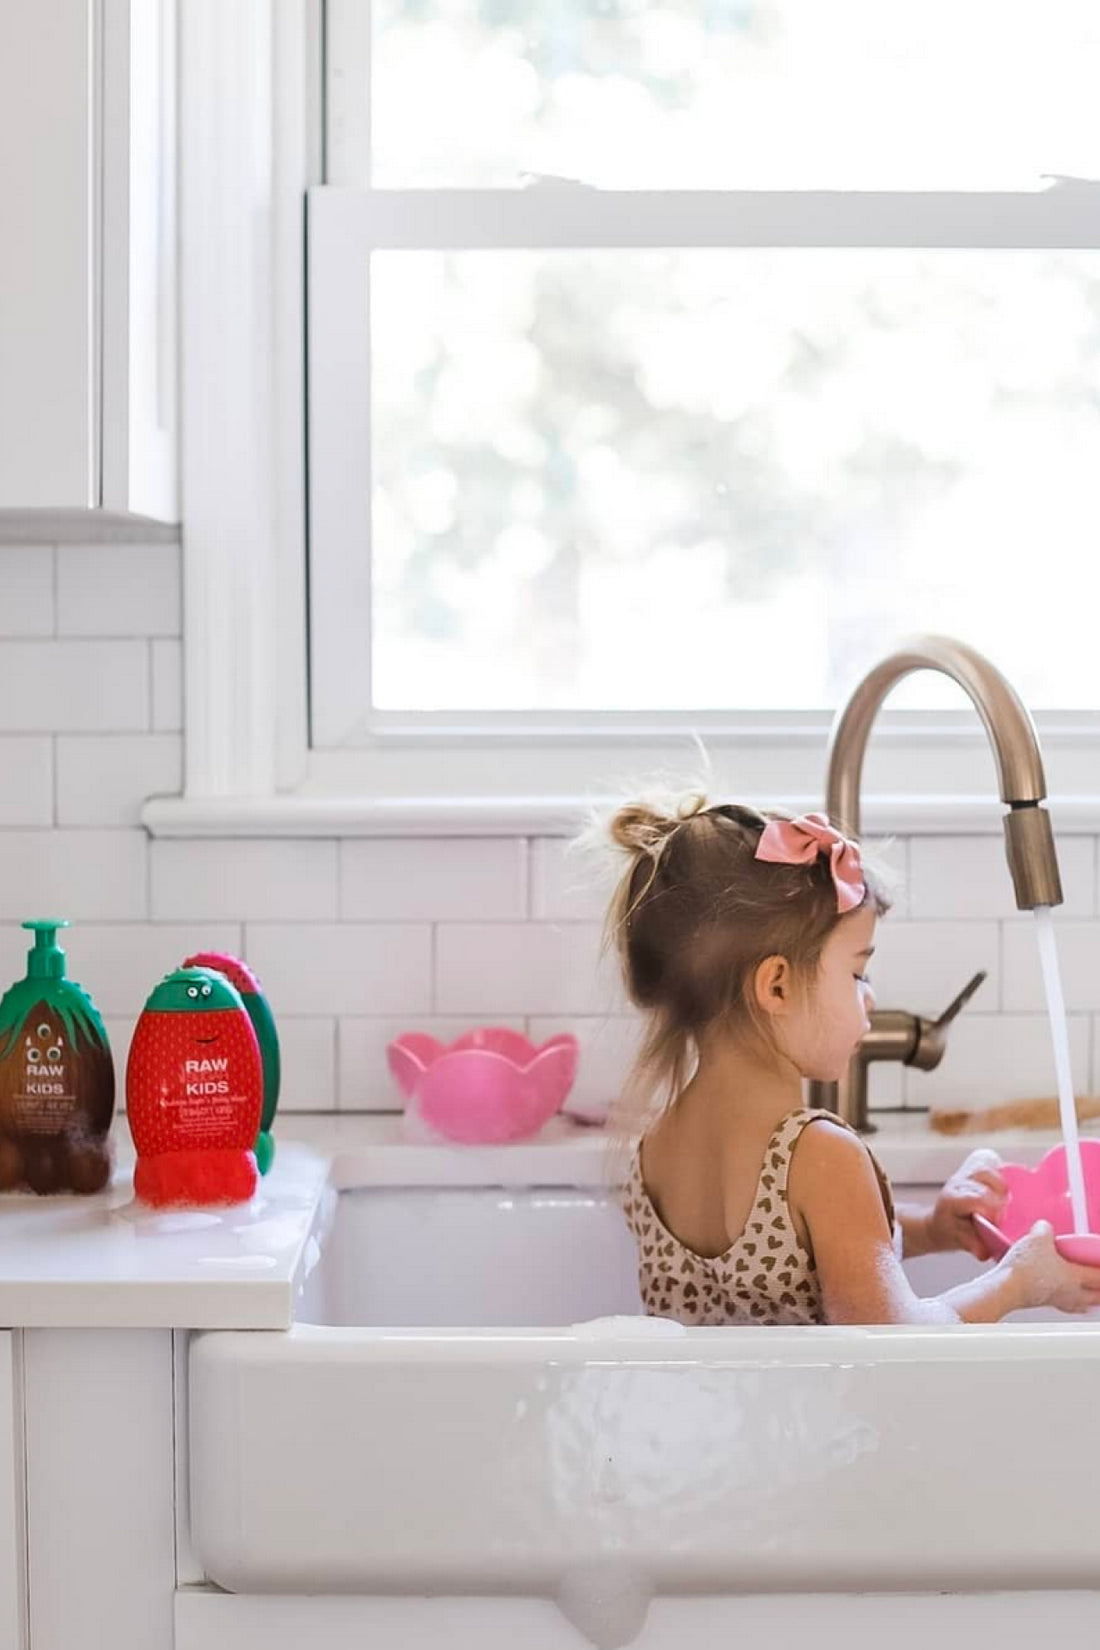 Girl playing in sink with pink bowl and Kids Products on side of sink